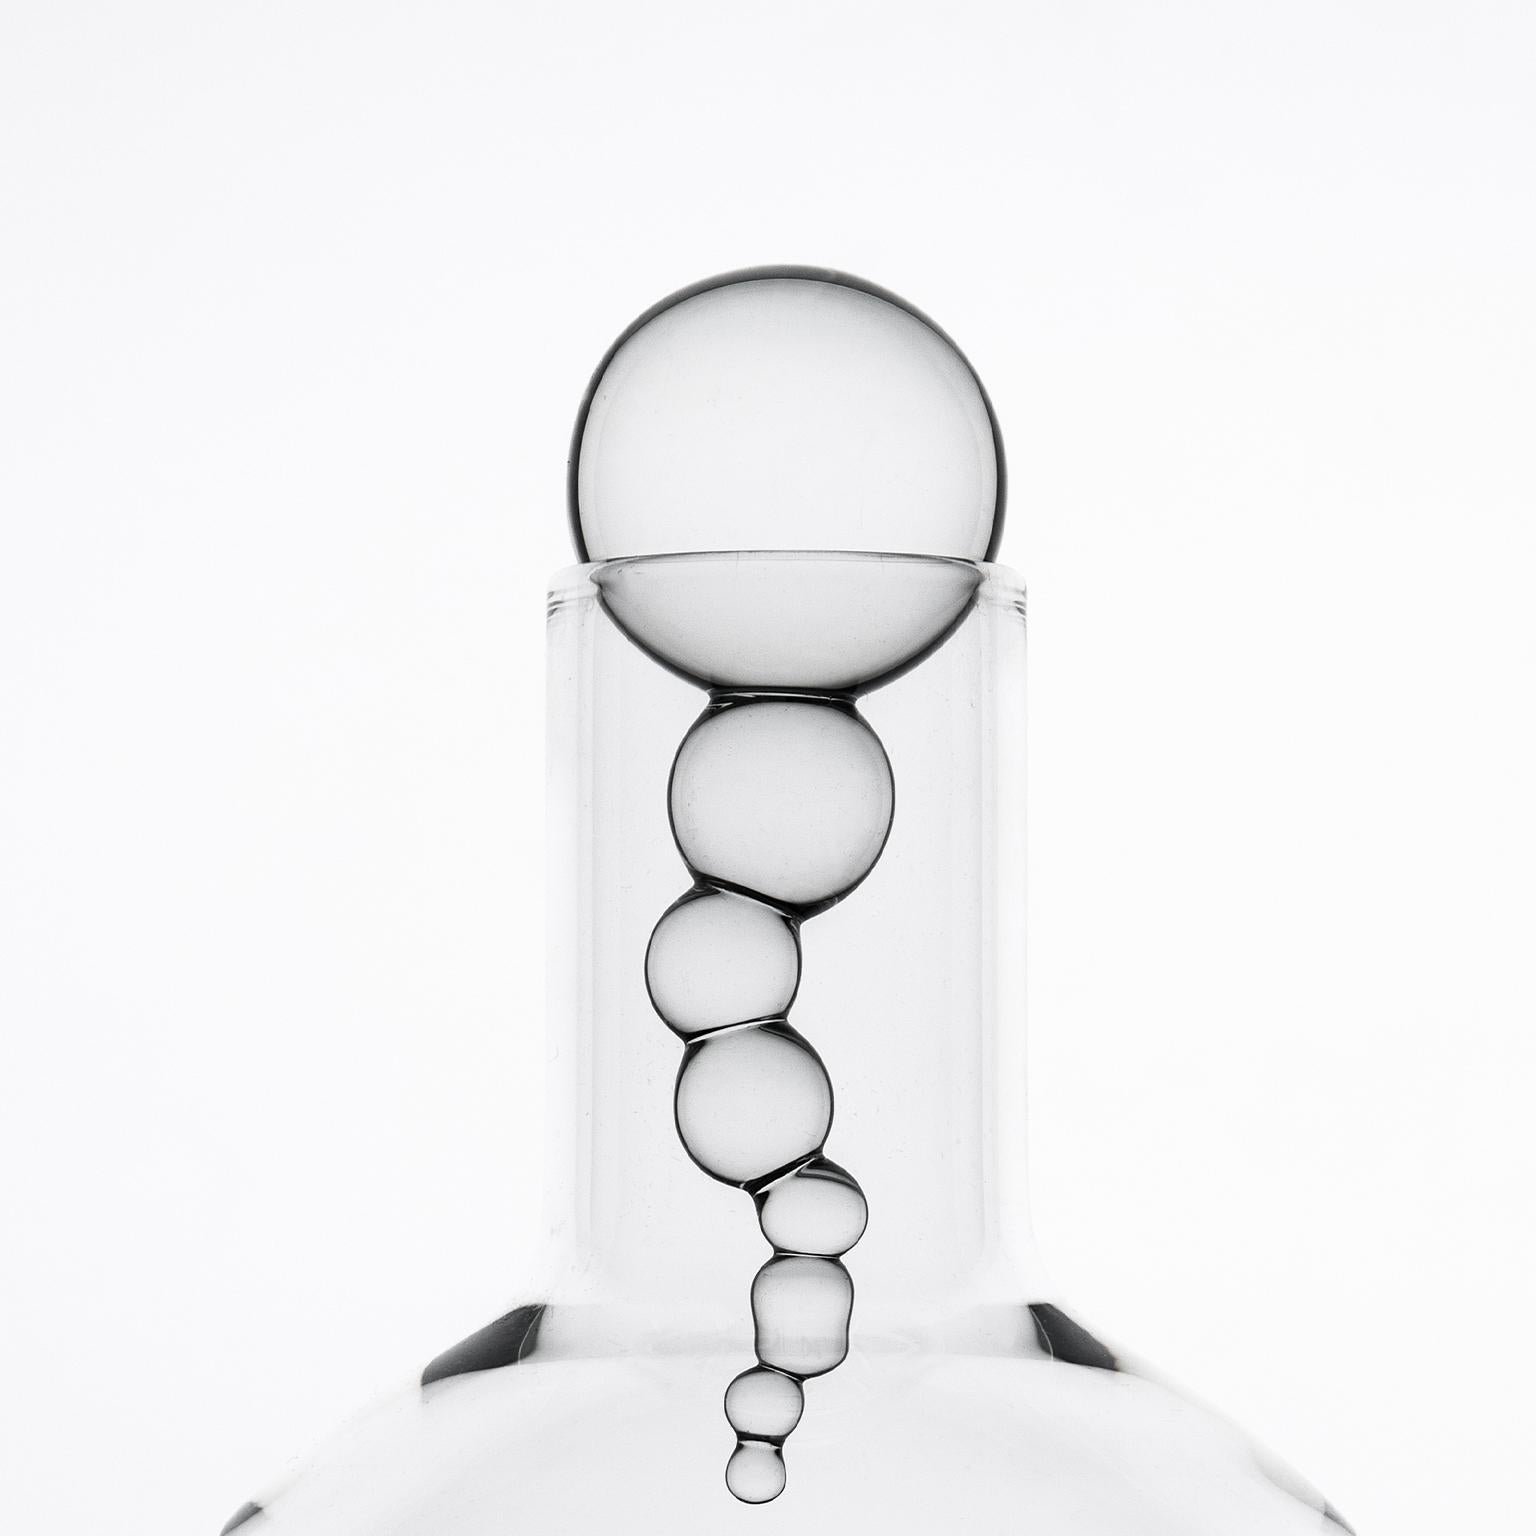 'Alchemica Bottle'
A Hand Blown Glass Bottle by Simone Crestani
Alchemica Bottle is one of the pieces from the Alchemica Collection.

